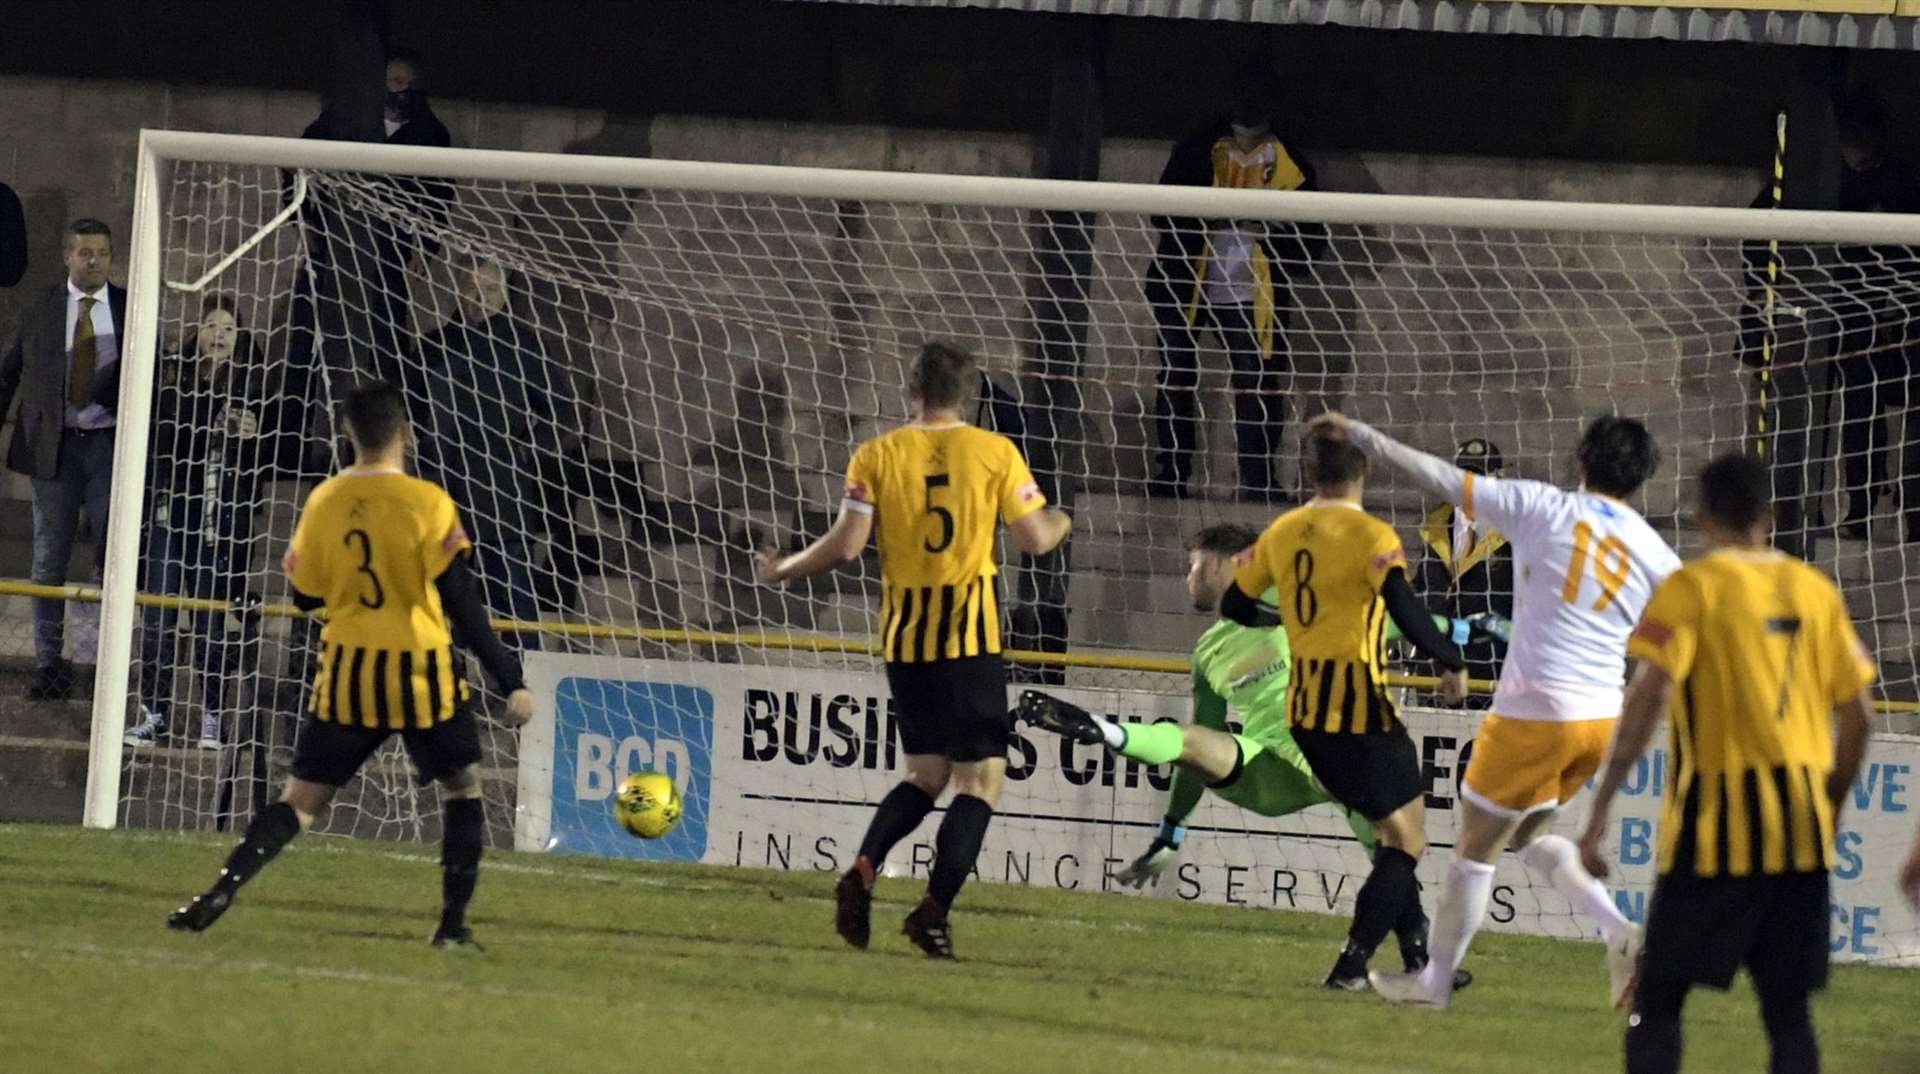 Former Gills midfielder Charlie Allen puts Cray Wanderers ahead at Folkestone on Tuesday night. Picture: Barry Goodwin (42491340)